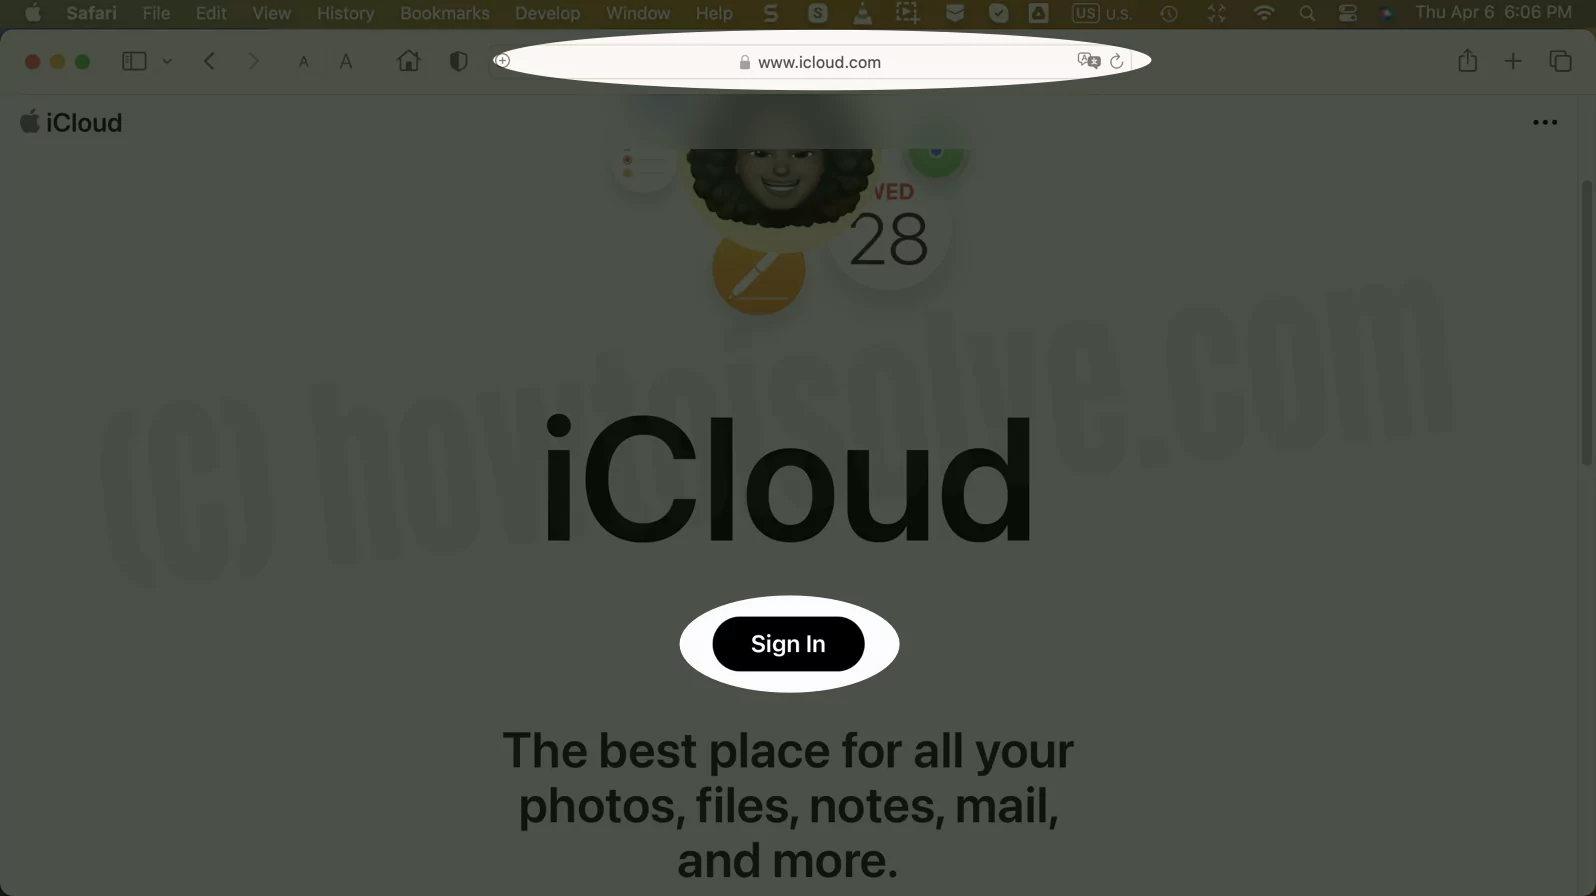 sign-in-to-icloud-account